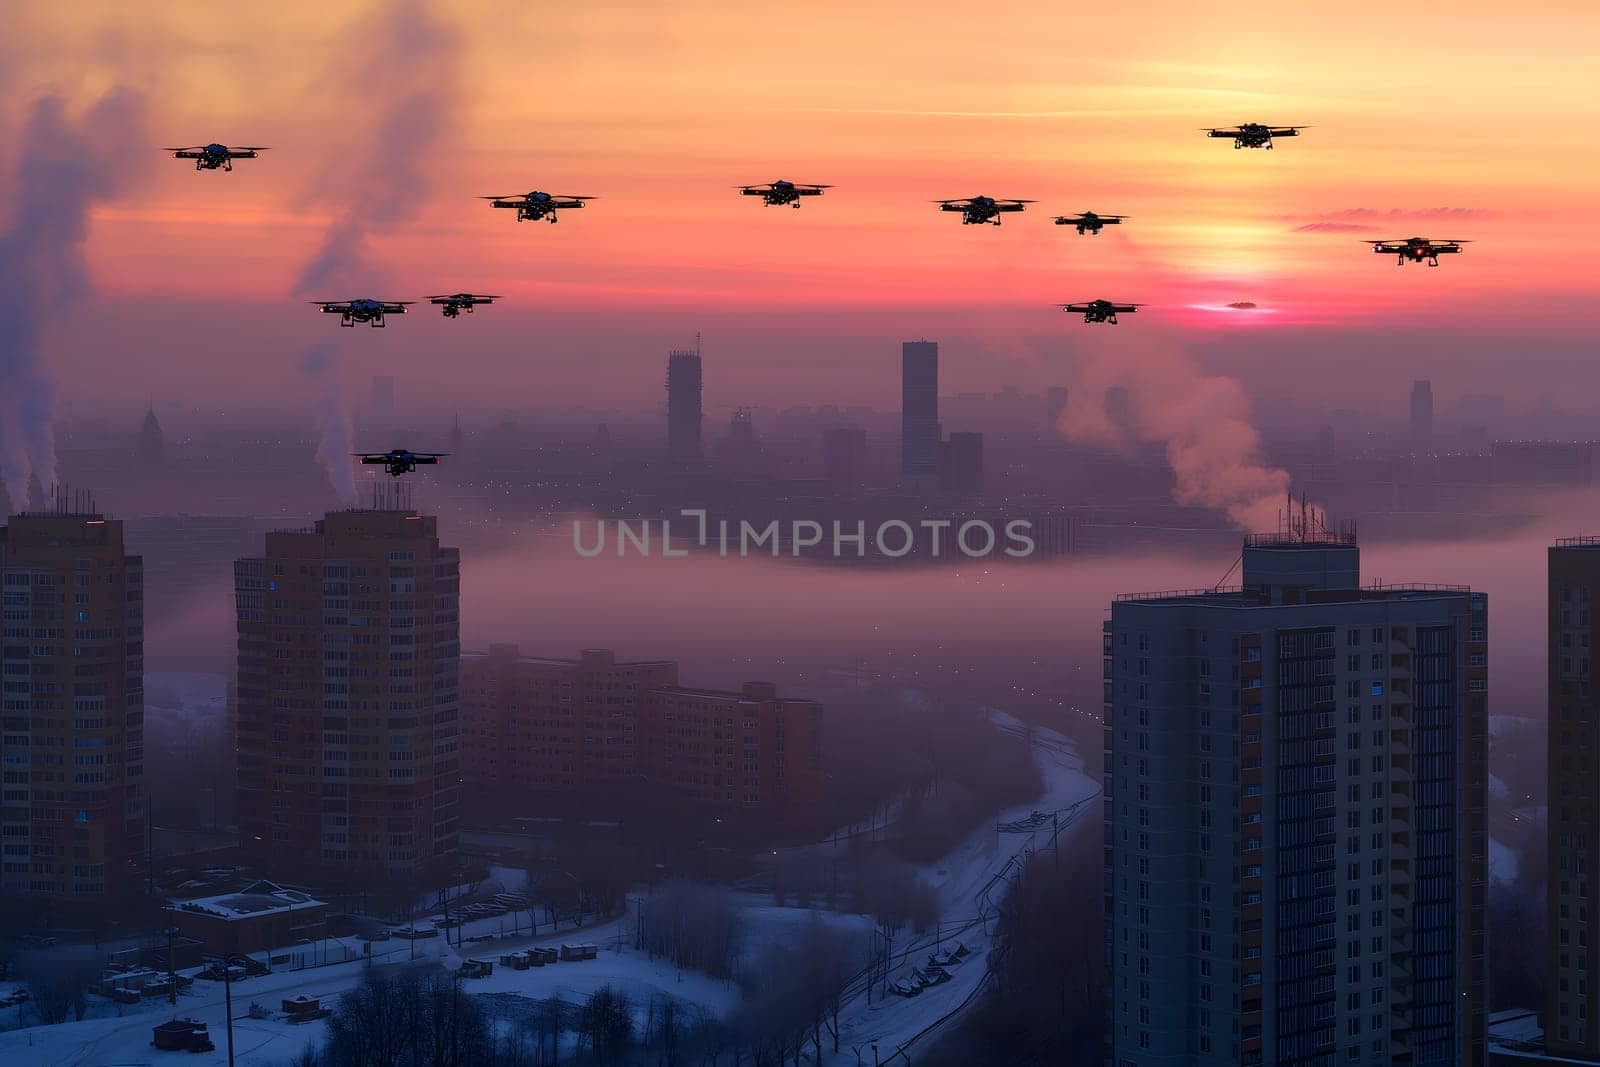 group of drones over city at winter sunset or sunrise. Neural network generated image. Not based on any actual scene or pattern.